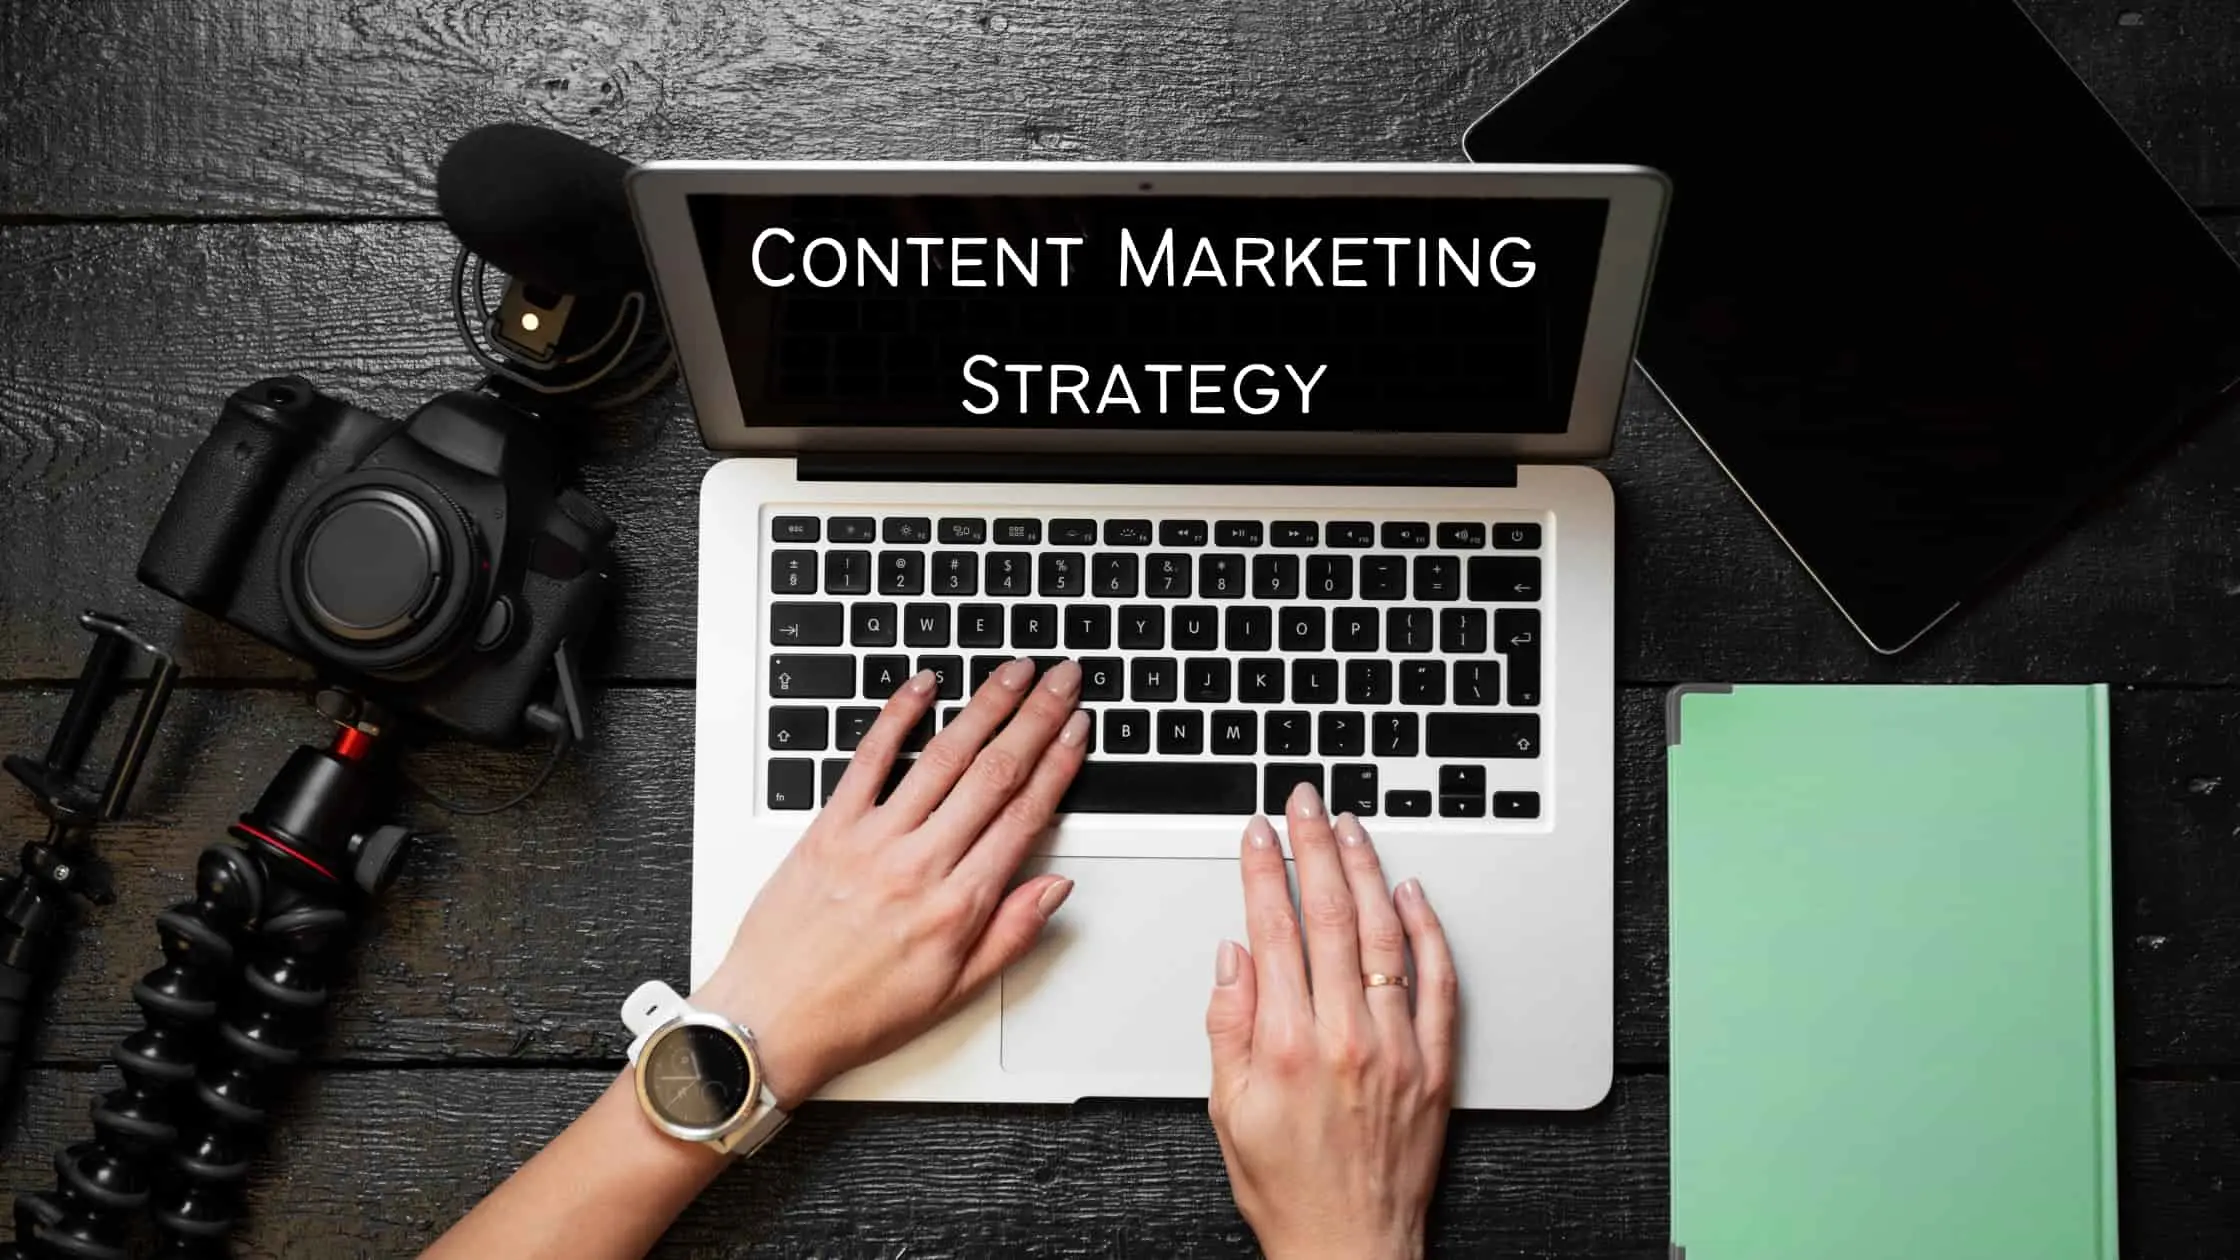 Content marketing strategies for all stages of the B2B buyer journey